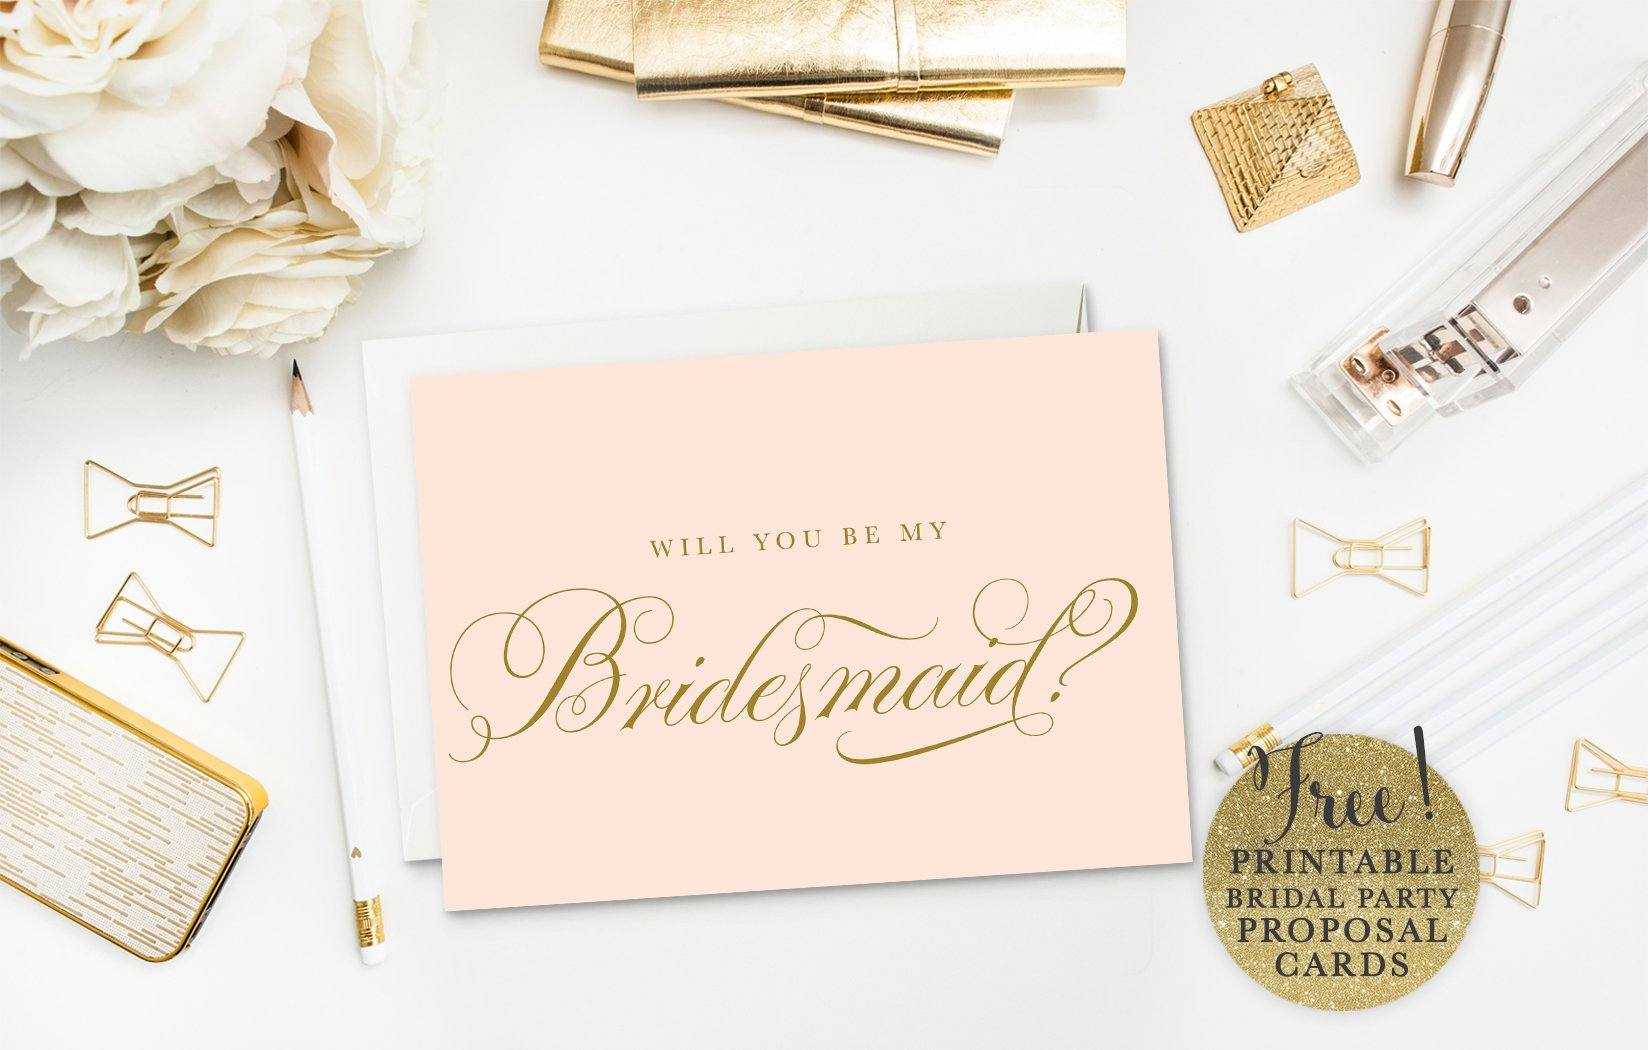 10 Will You Be My Bridesmaid? Cards (Free & Printable) Within Will You Be My Bridesmaid Card Template